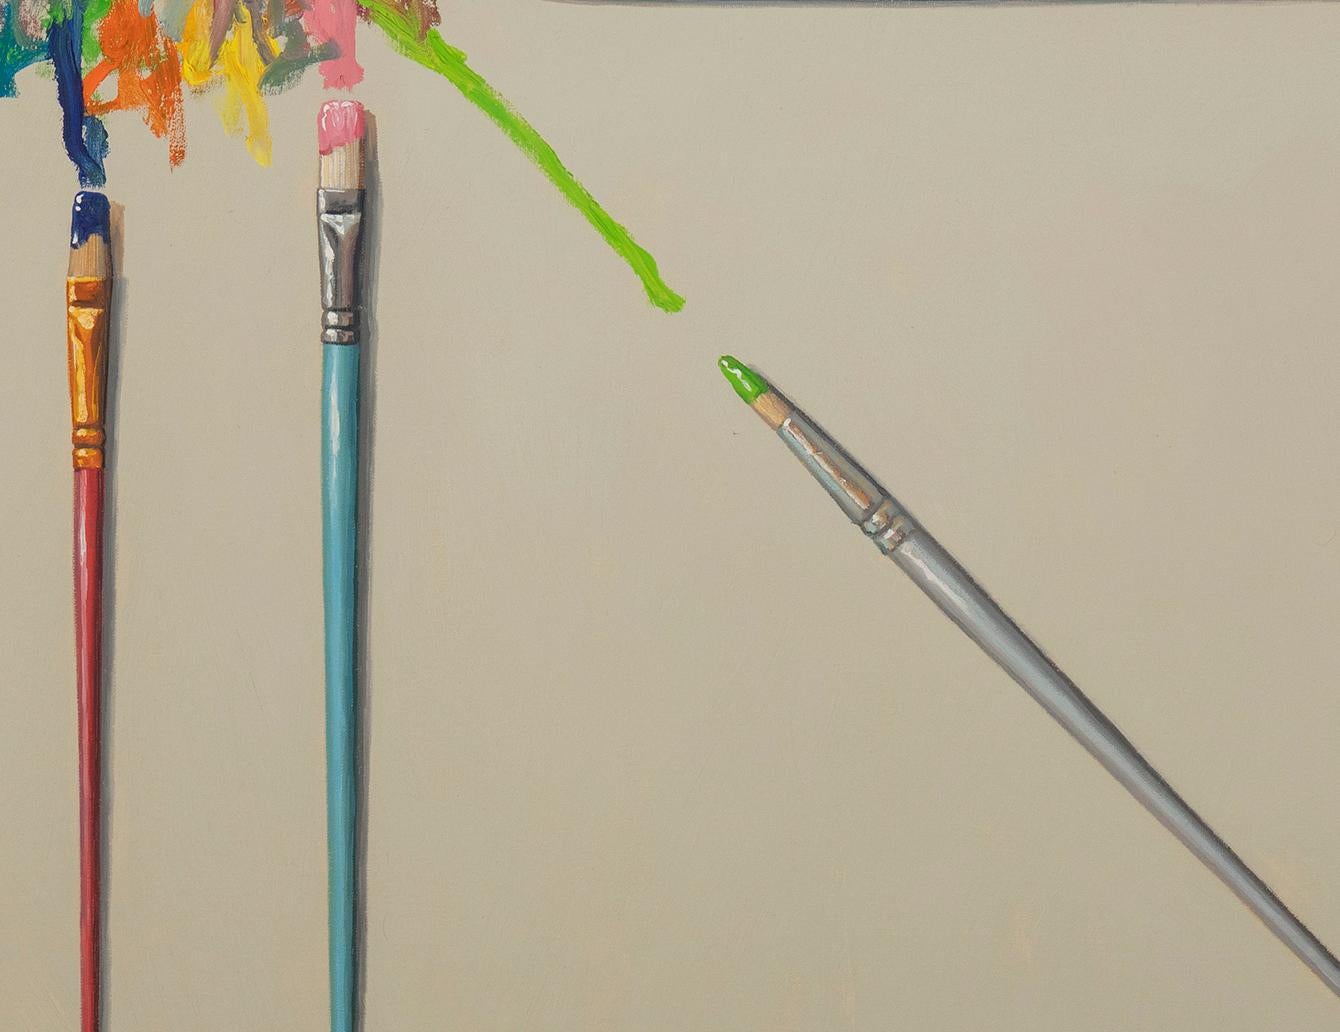 INTERSECTION, photorealism, paint brushes, still-life, multi-colored  - Brown Still-Life Painting by Robert Jackson